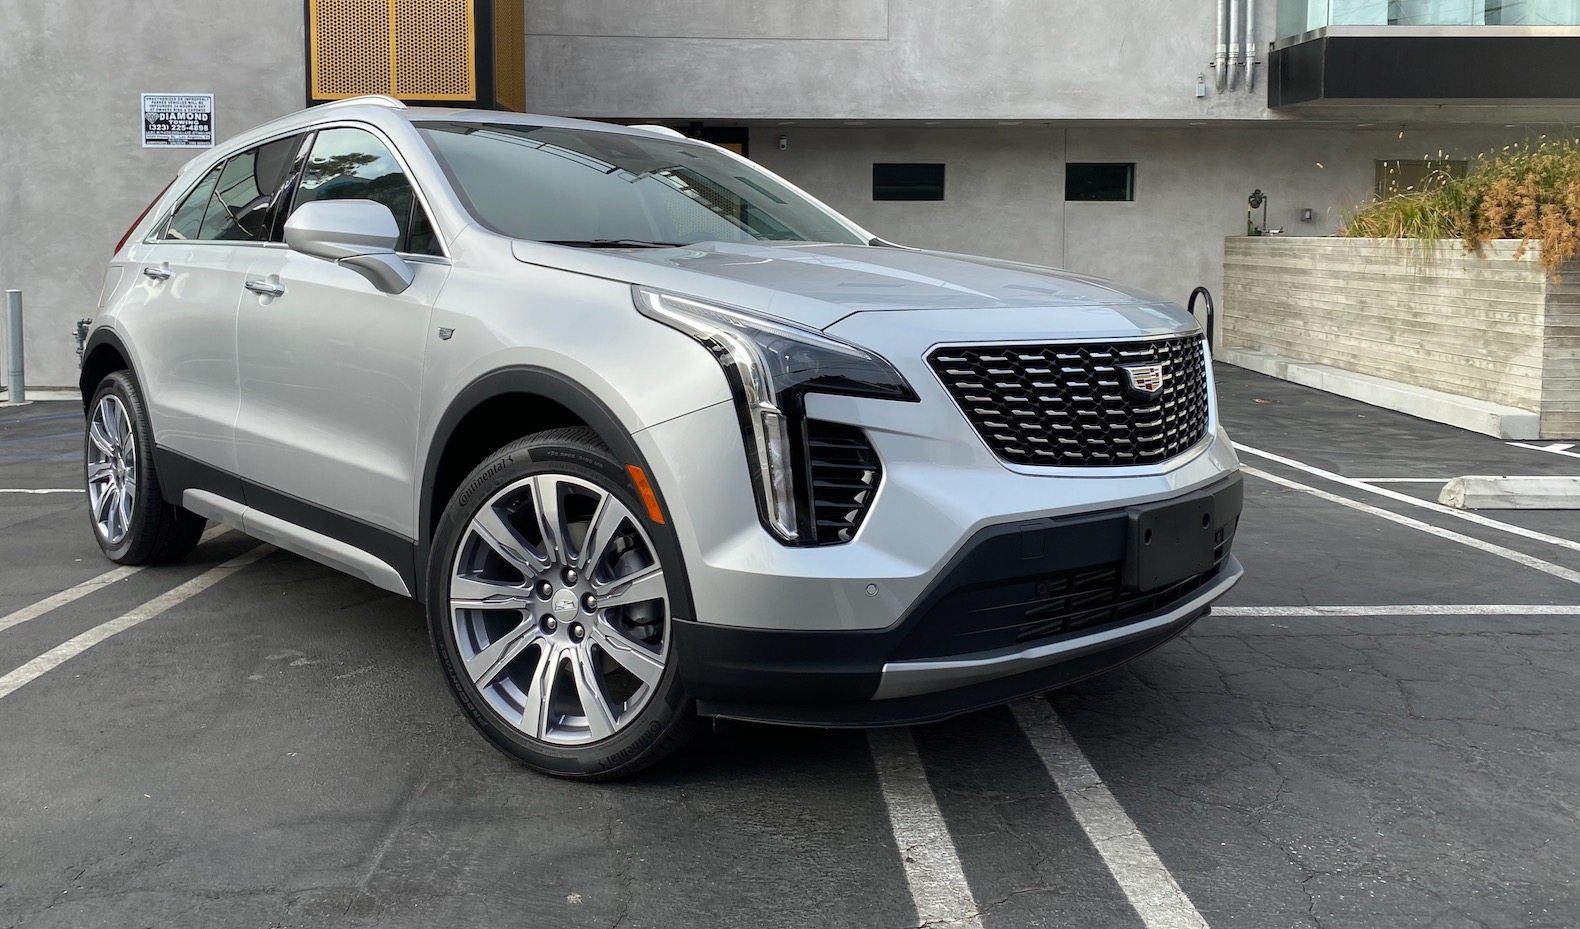 2020 Cadillac XT4 Review: Stylish and Spacious - The Torque Report